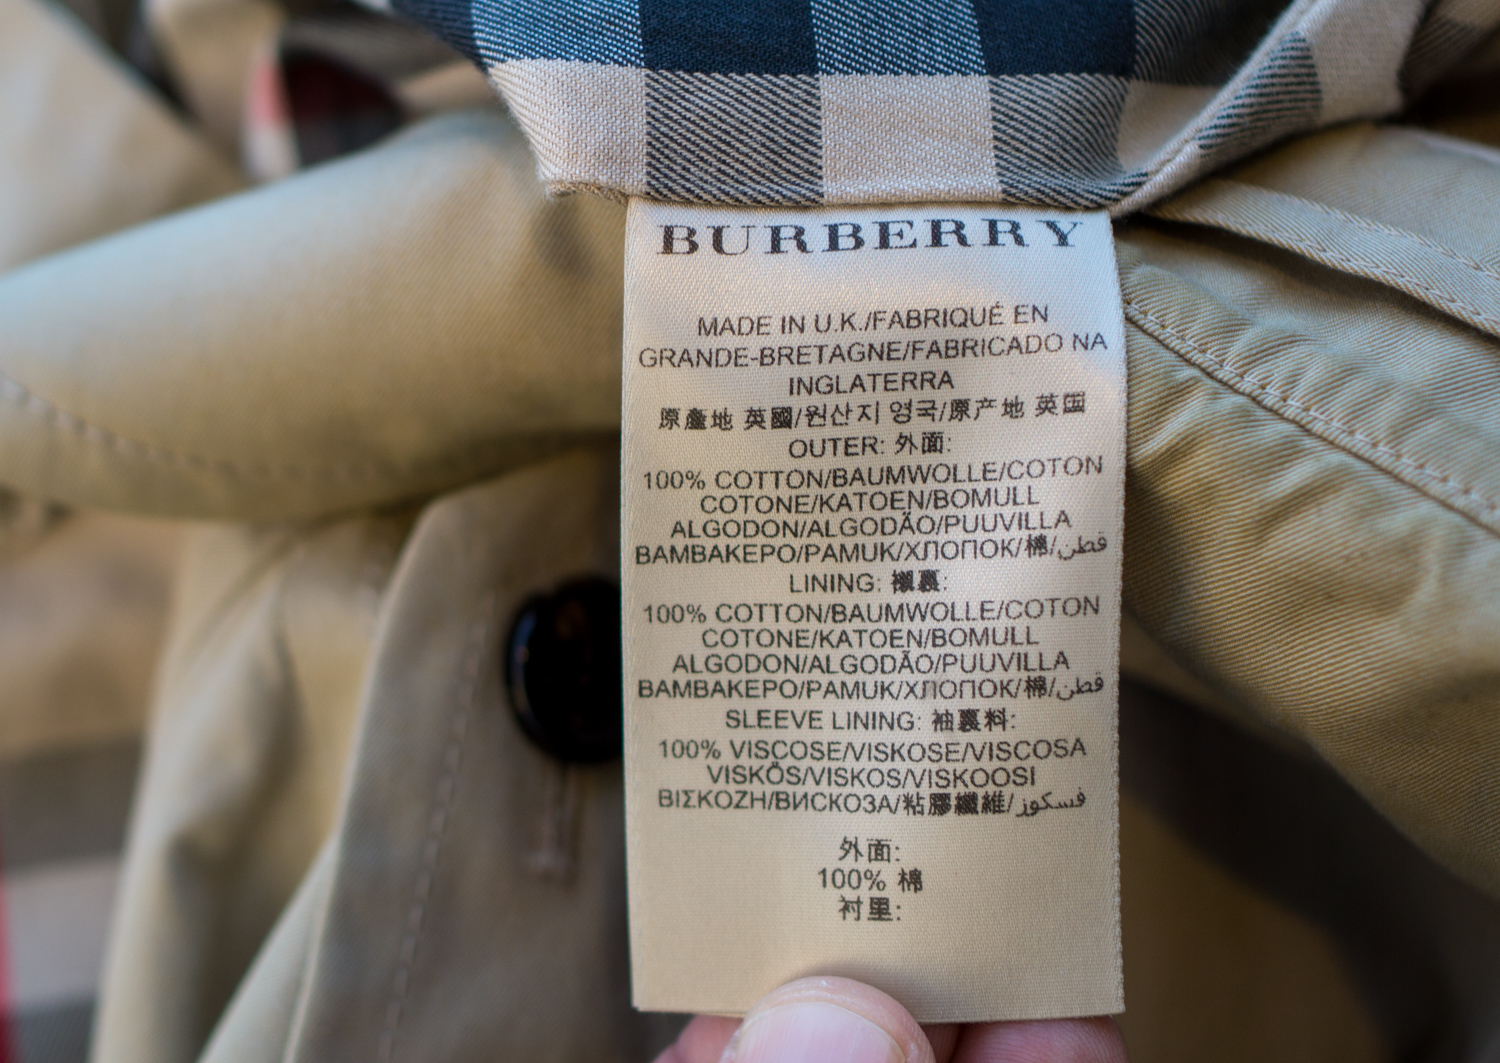 Burberry Trench Coat Long - Size UK 54 or US 44 | The Fedora Lounge